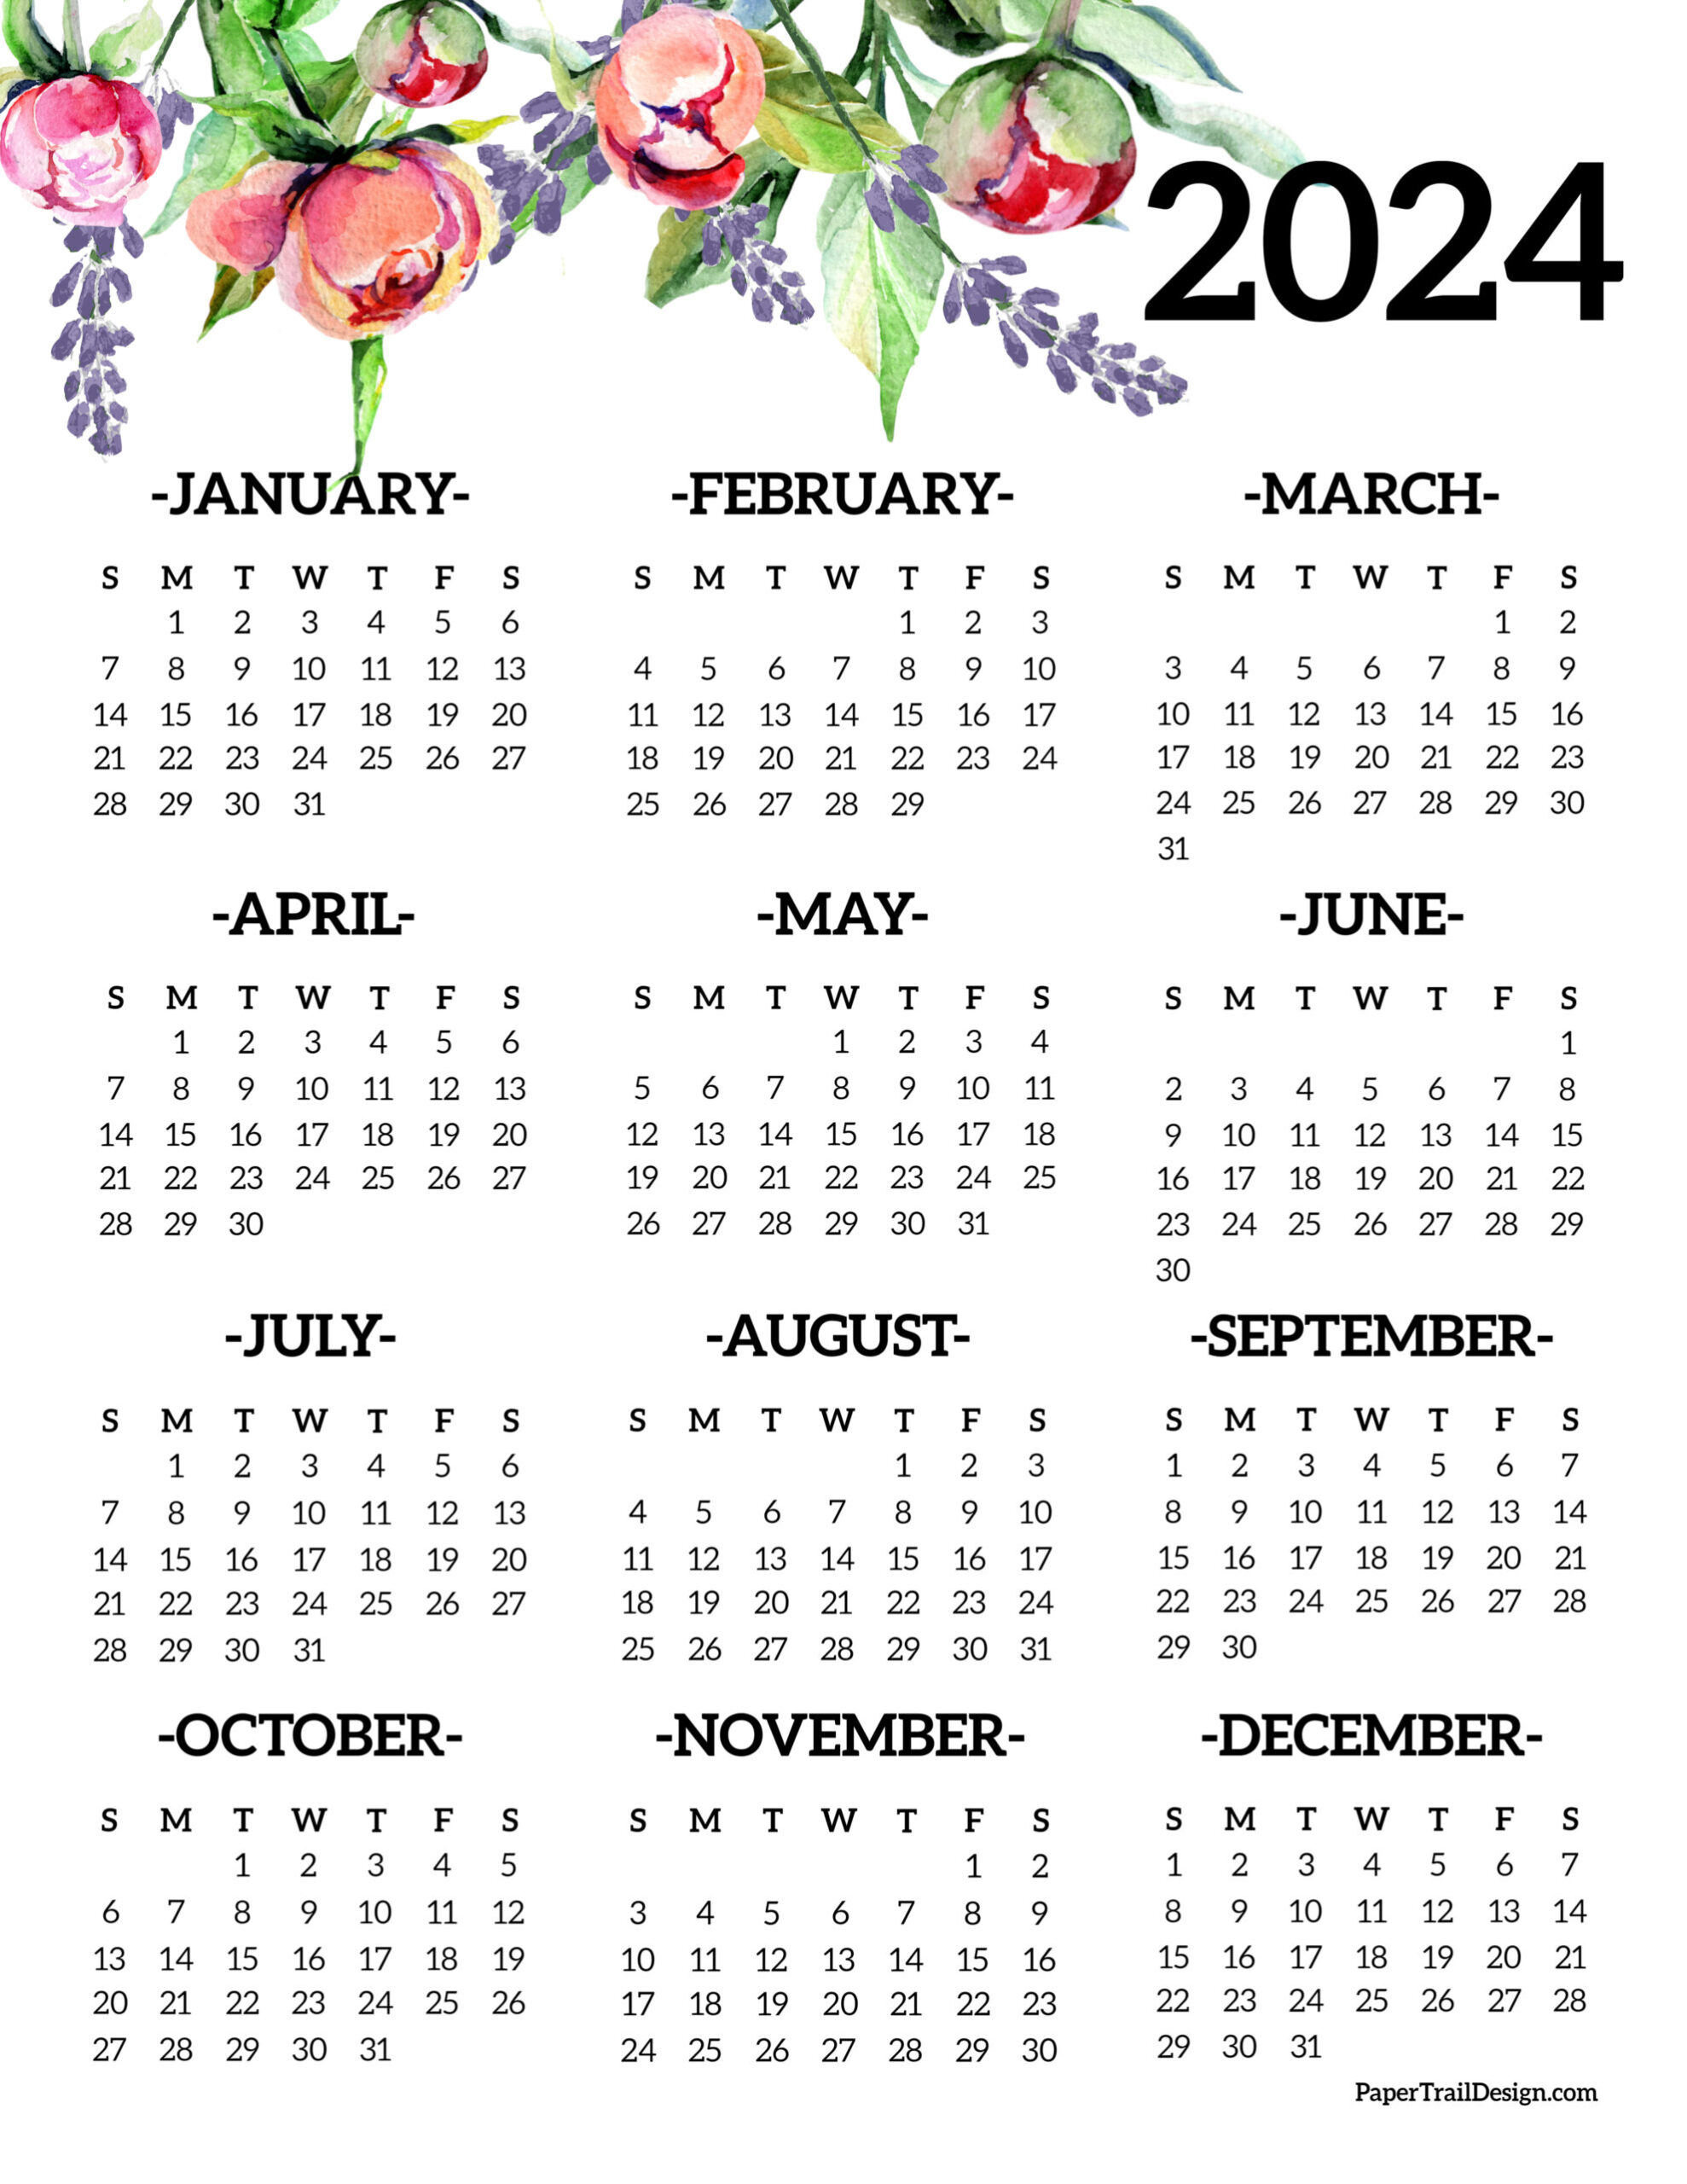 Calendar 2024 Printable One Page - Paper Trail Design for 2024 Calendar Printable One Page